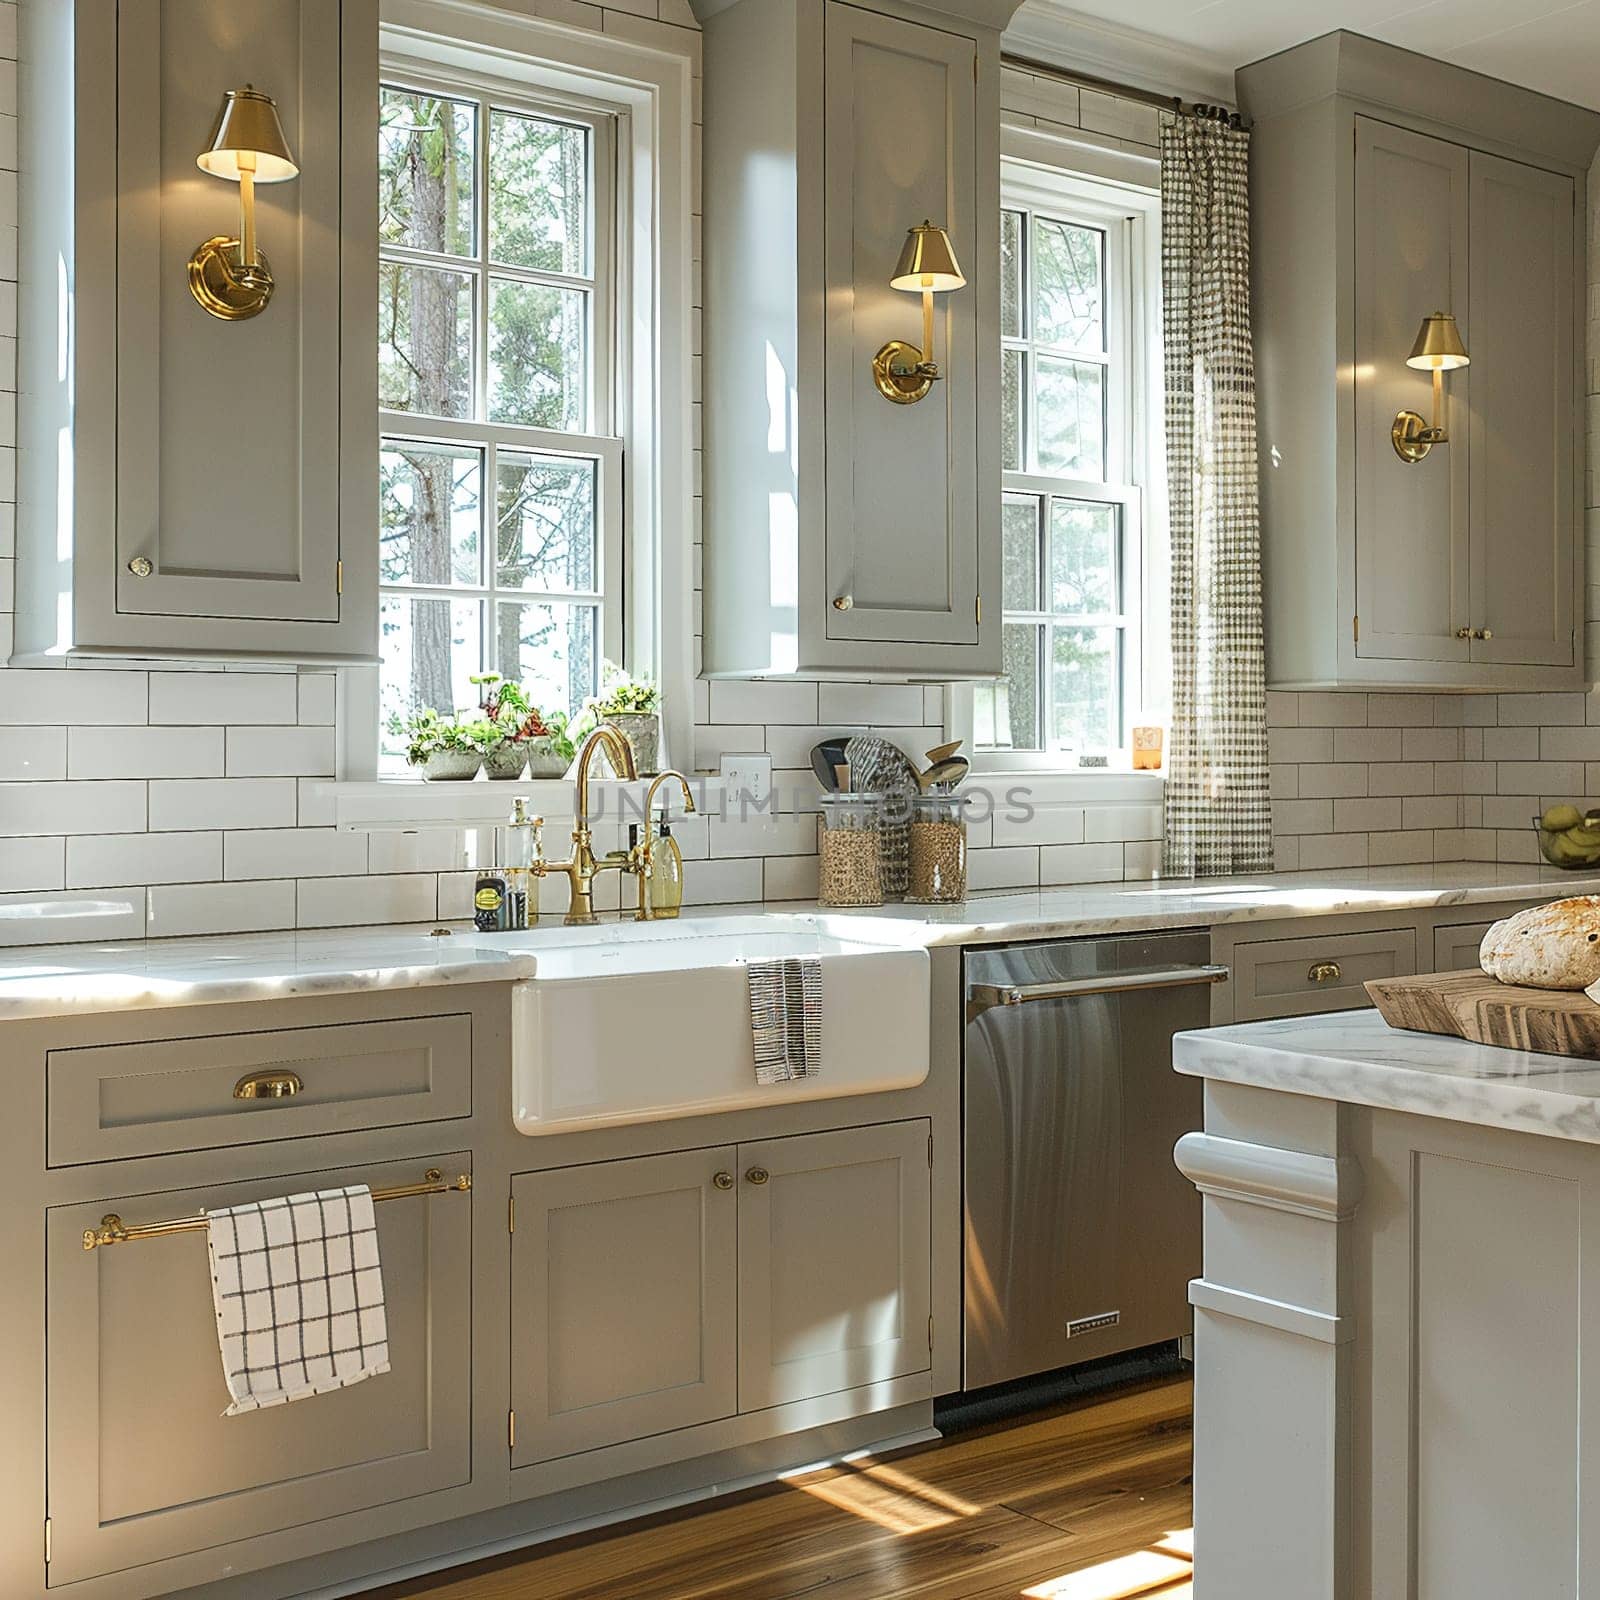 Southern-style kitchen with a farmhouse sink and checkered curtains.